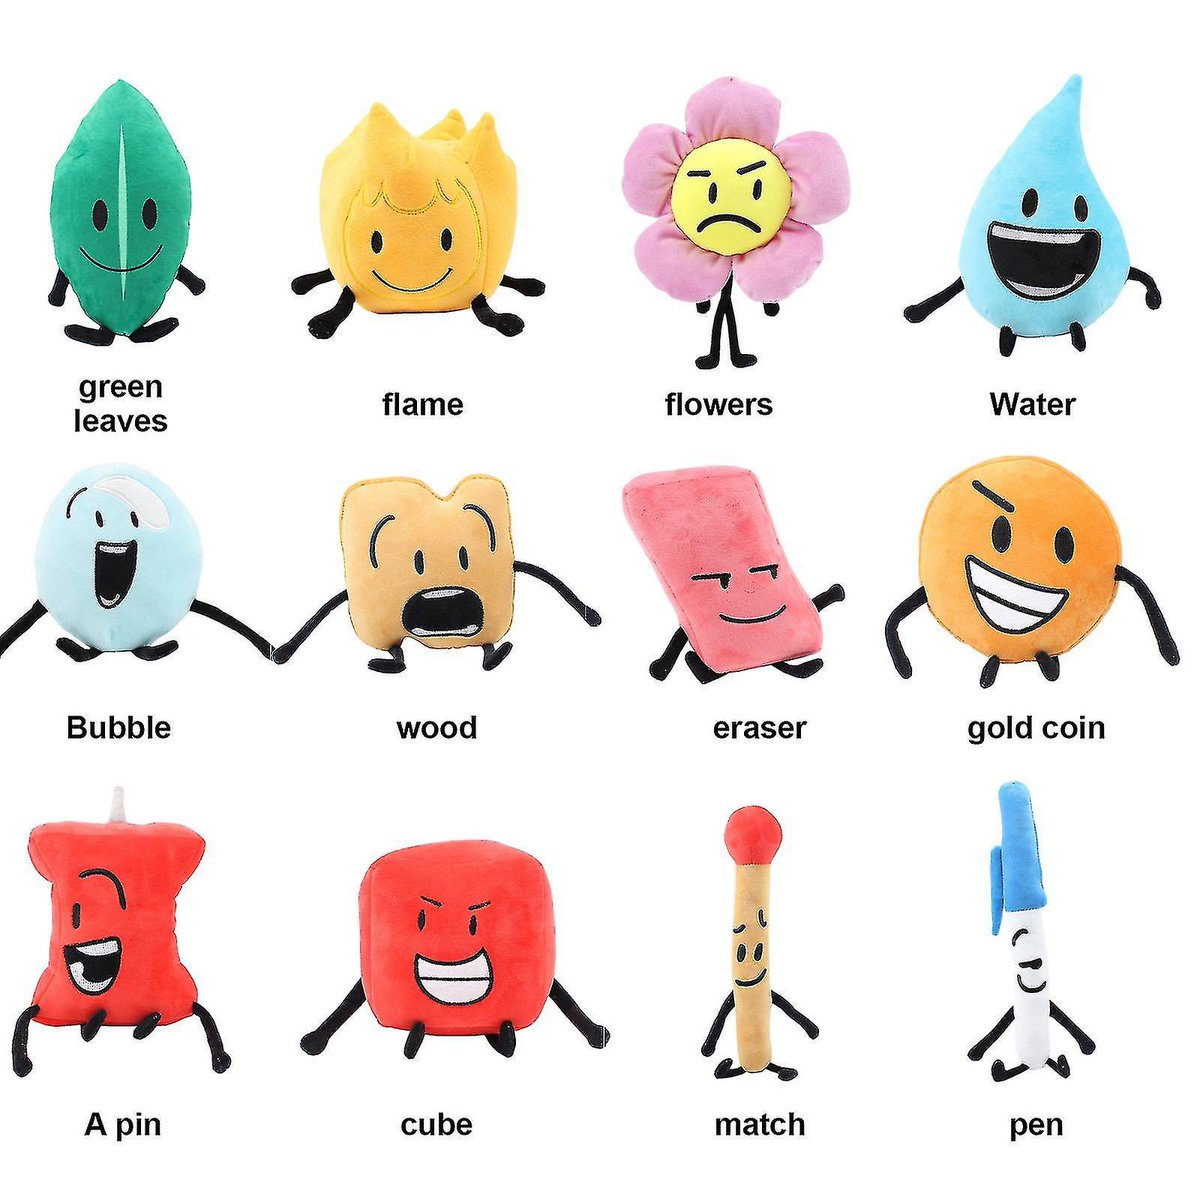 Which bootleg bfdi plush are you